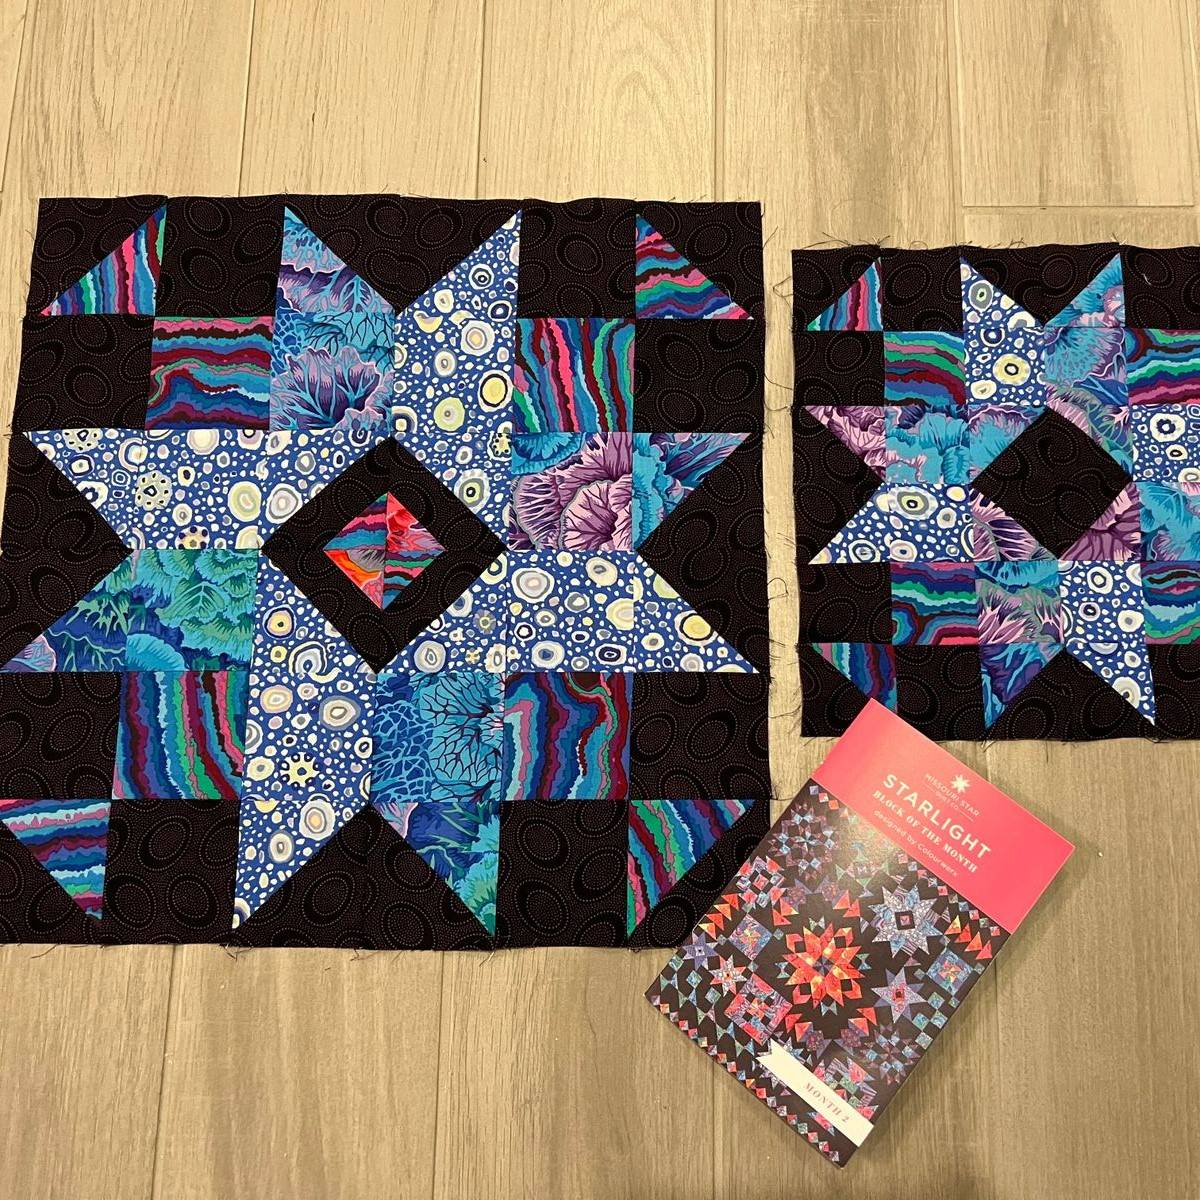 Quilter's Block of the Month Programs